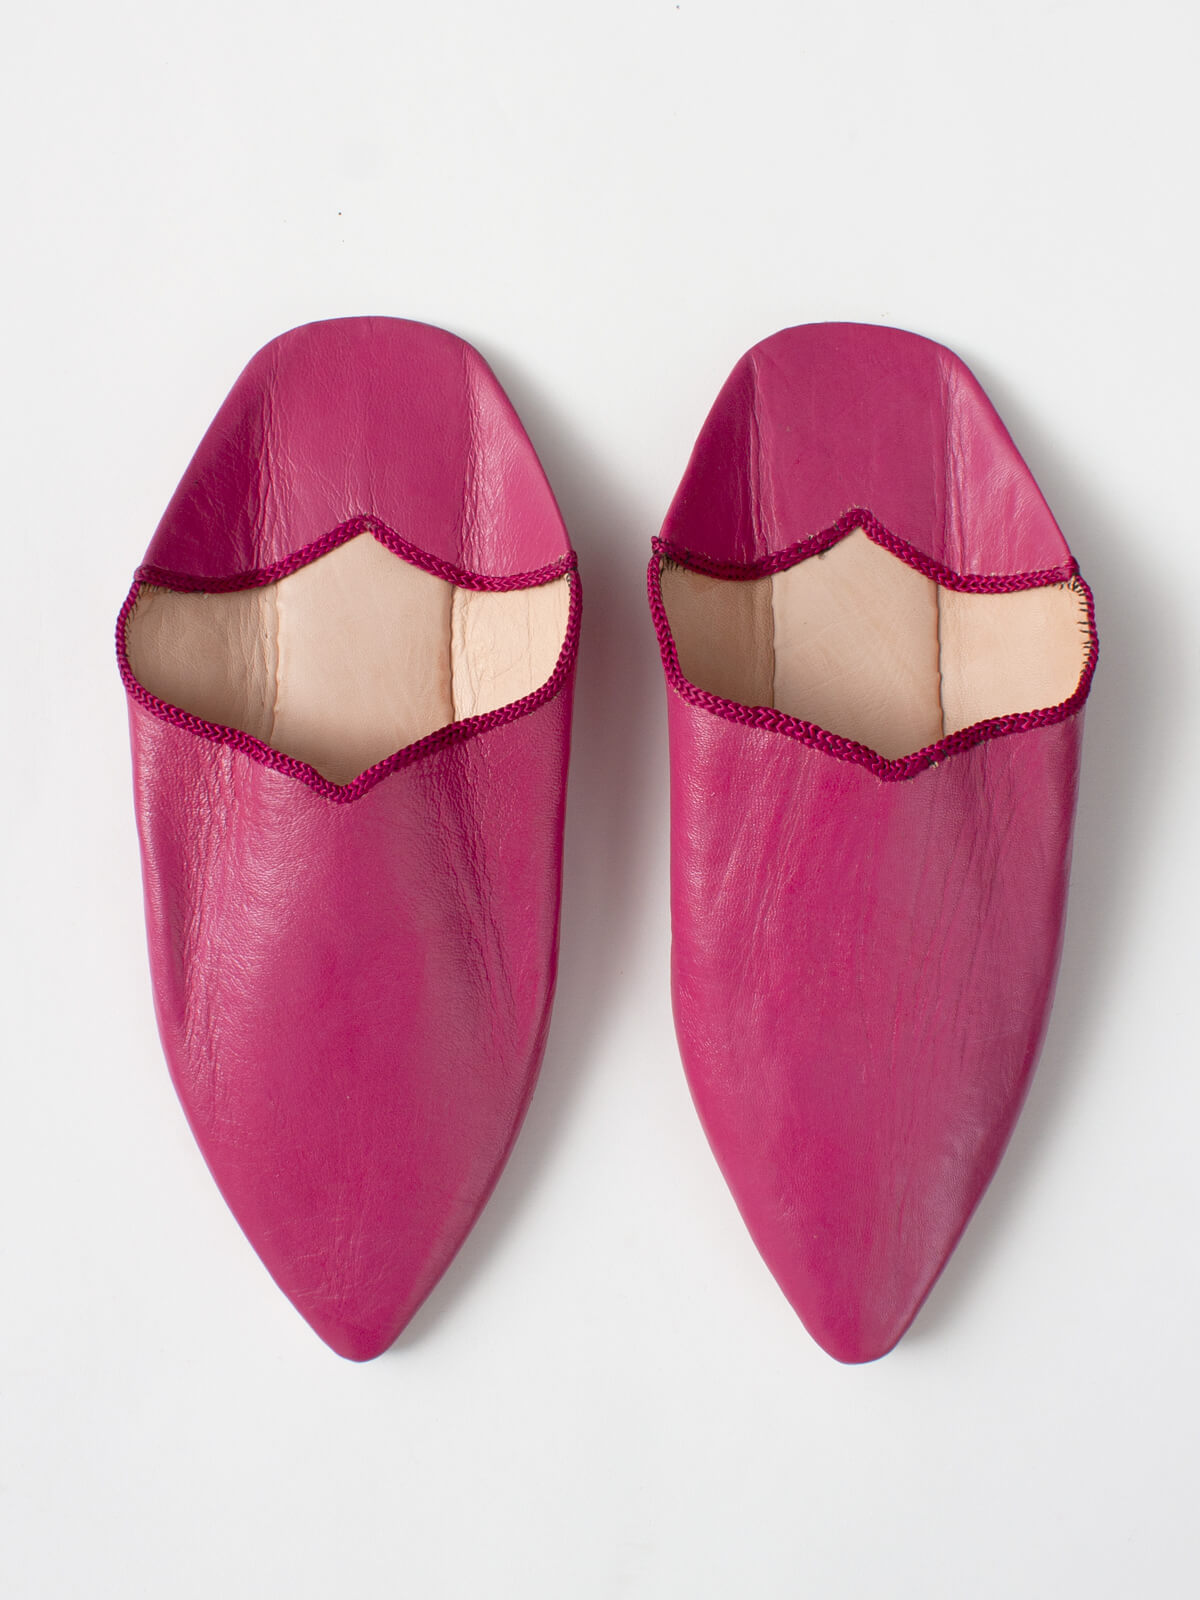 Moroccan Plain Pointed Babouche Slippers, Fuchsia